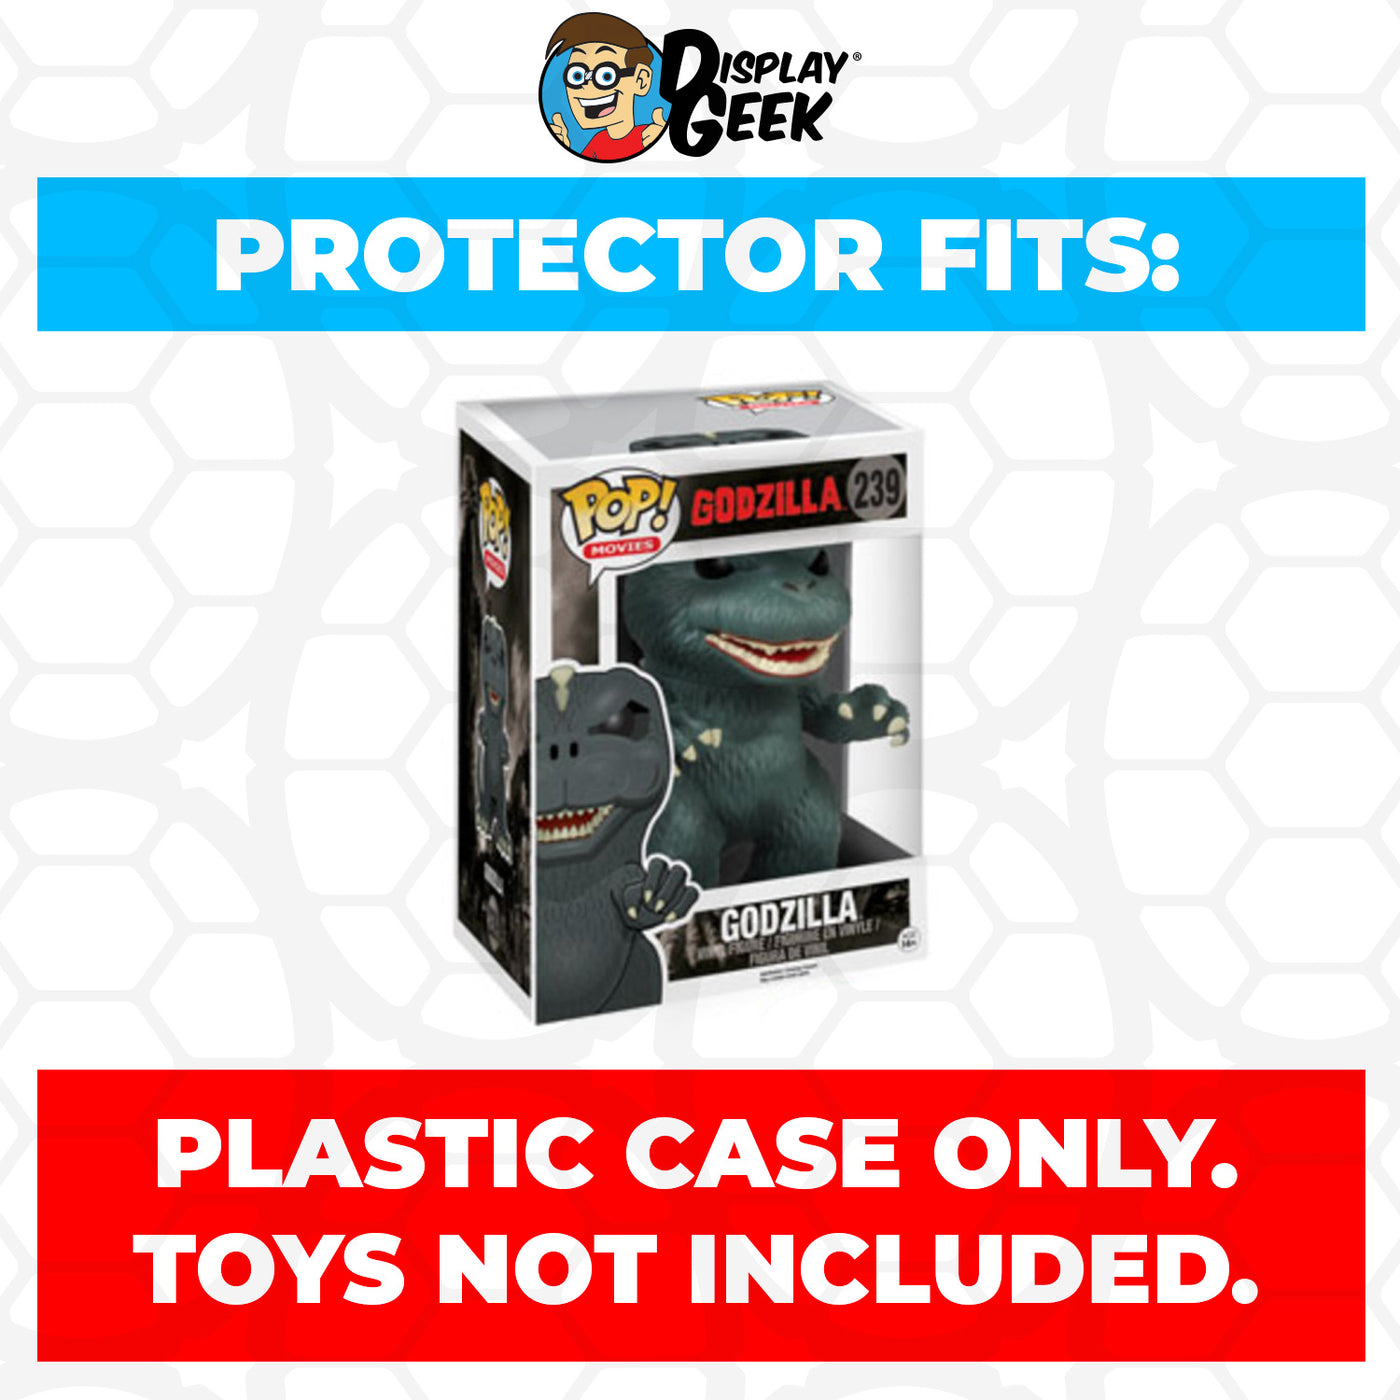 Pop Protector for 6 inch Godzilla #239 Super Funko Pop on The Protector Guide App by Display Geek